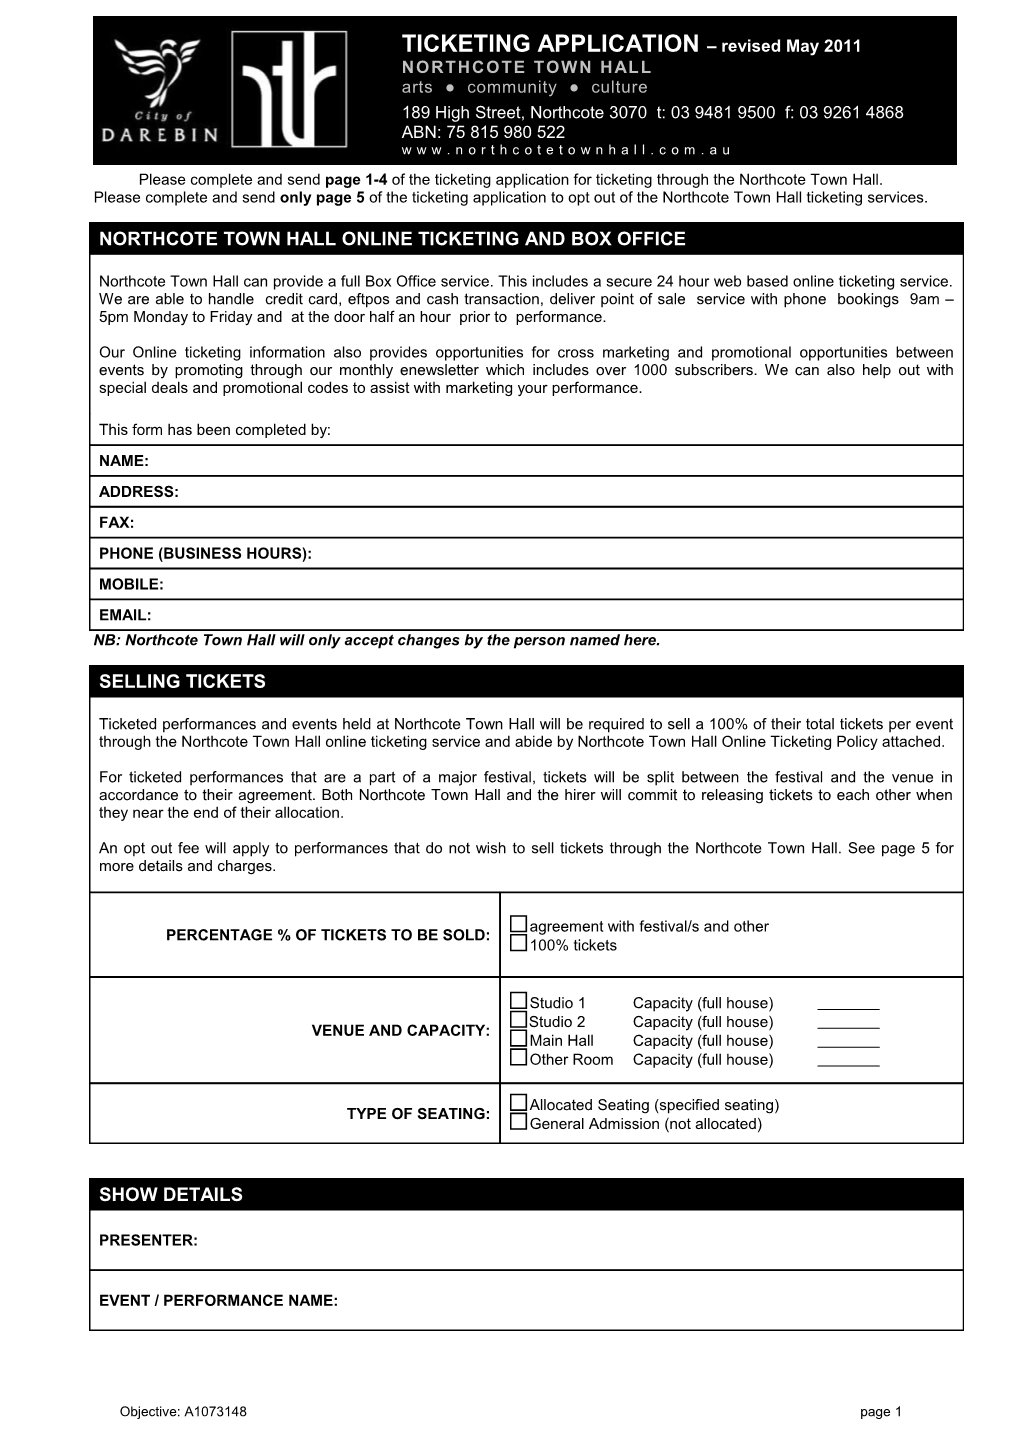 TICKETING APPLICATION Revised May 2011